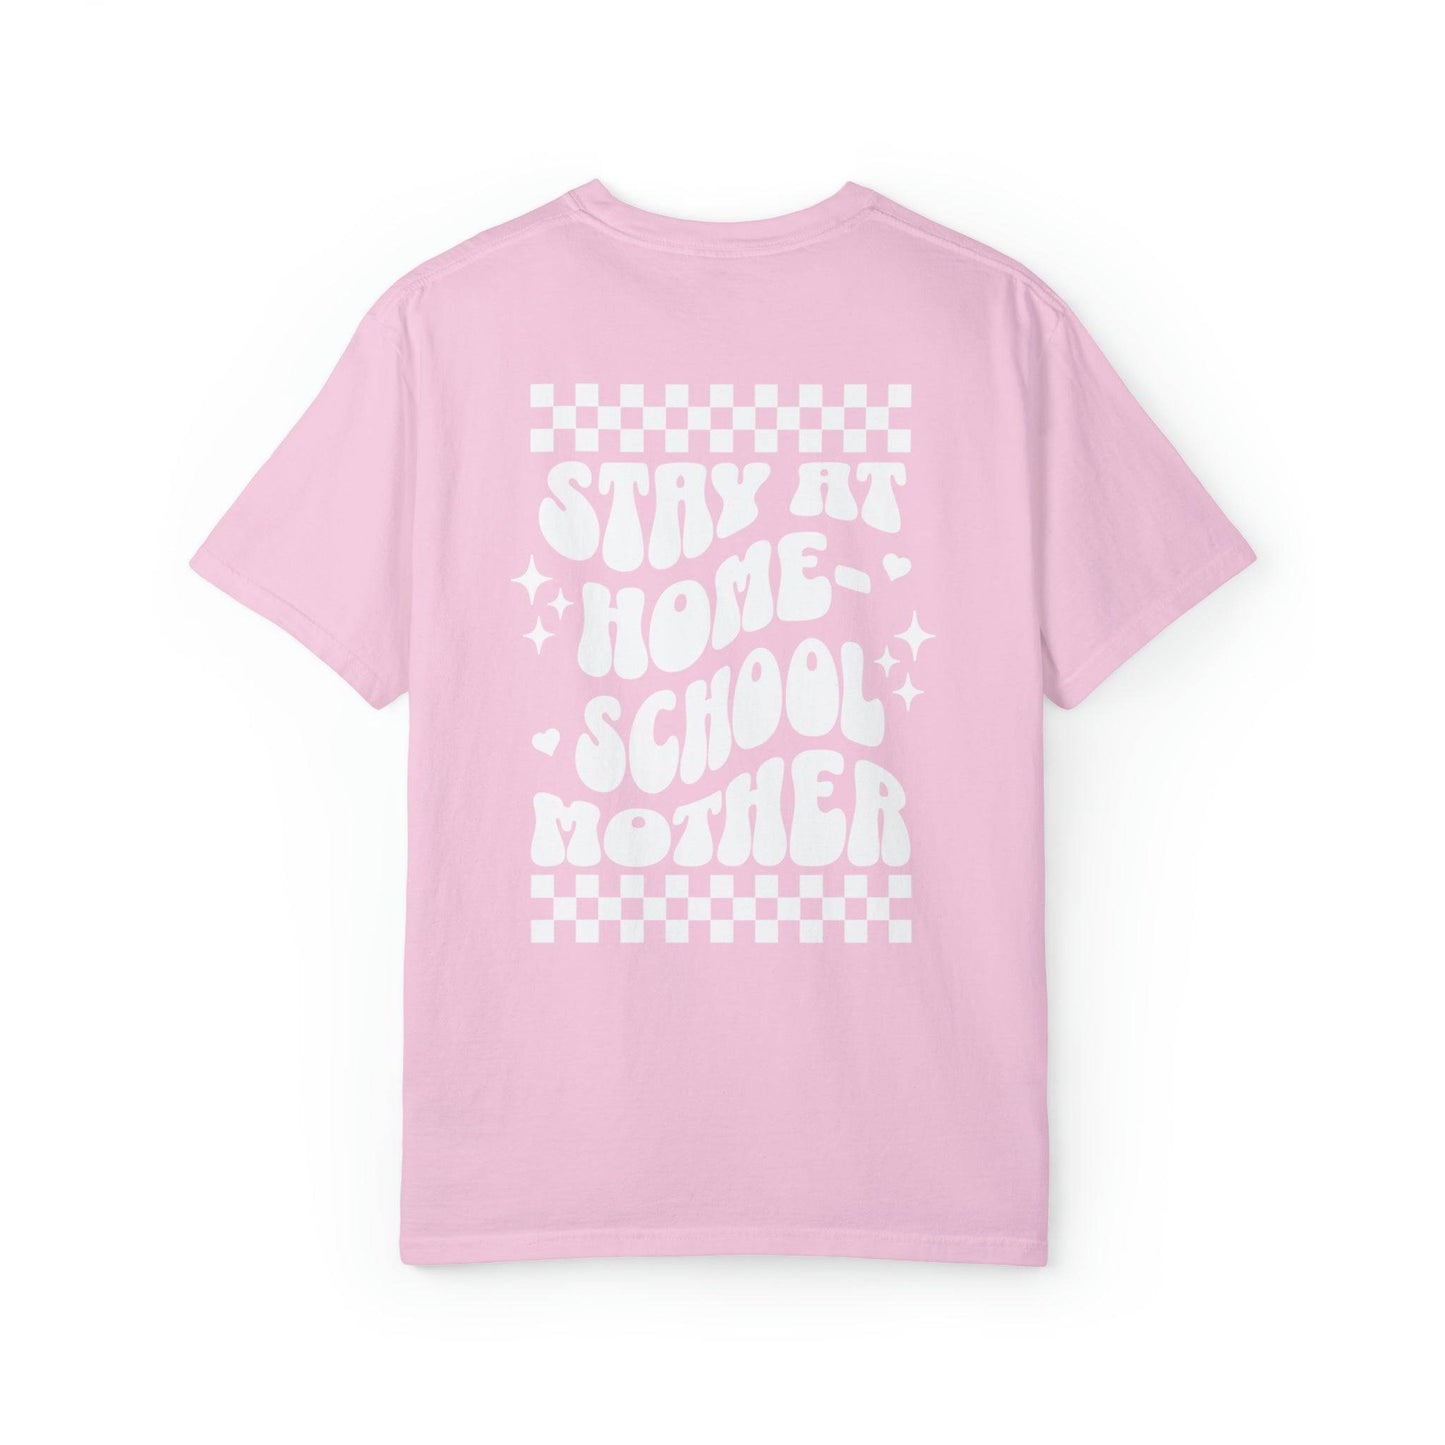 Stay At Home-School Mother T-shirt Checkered Retro Style